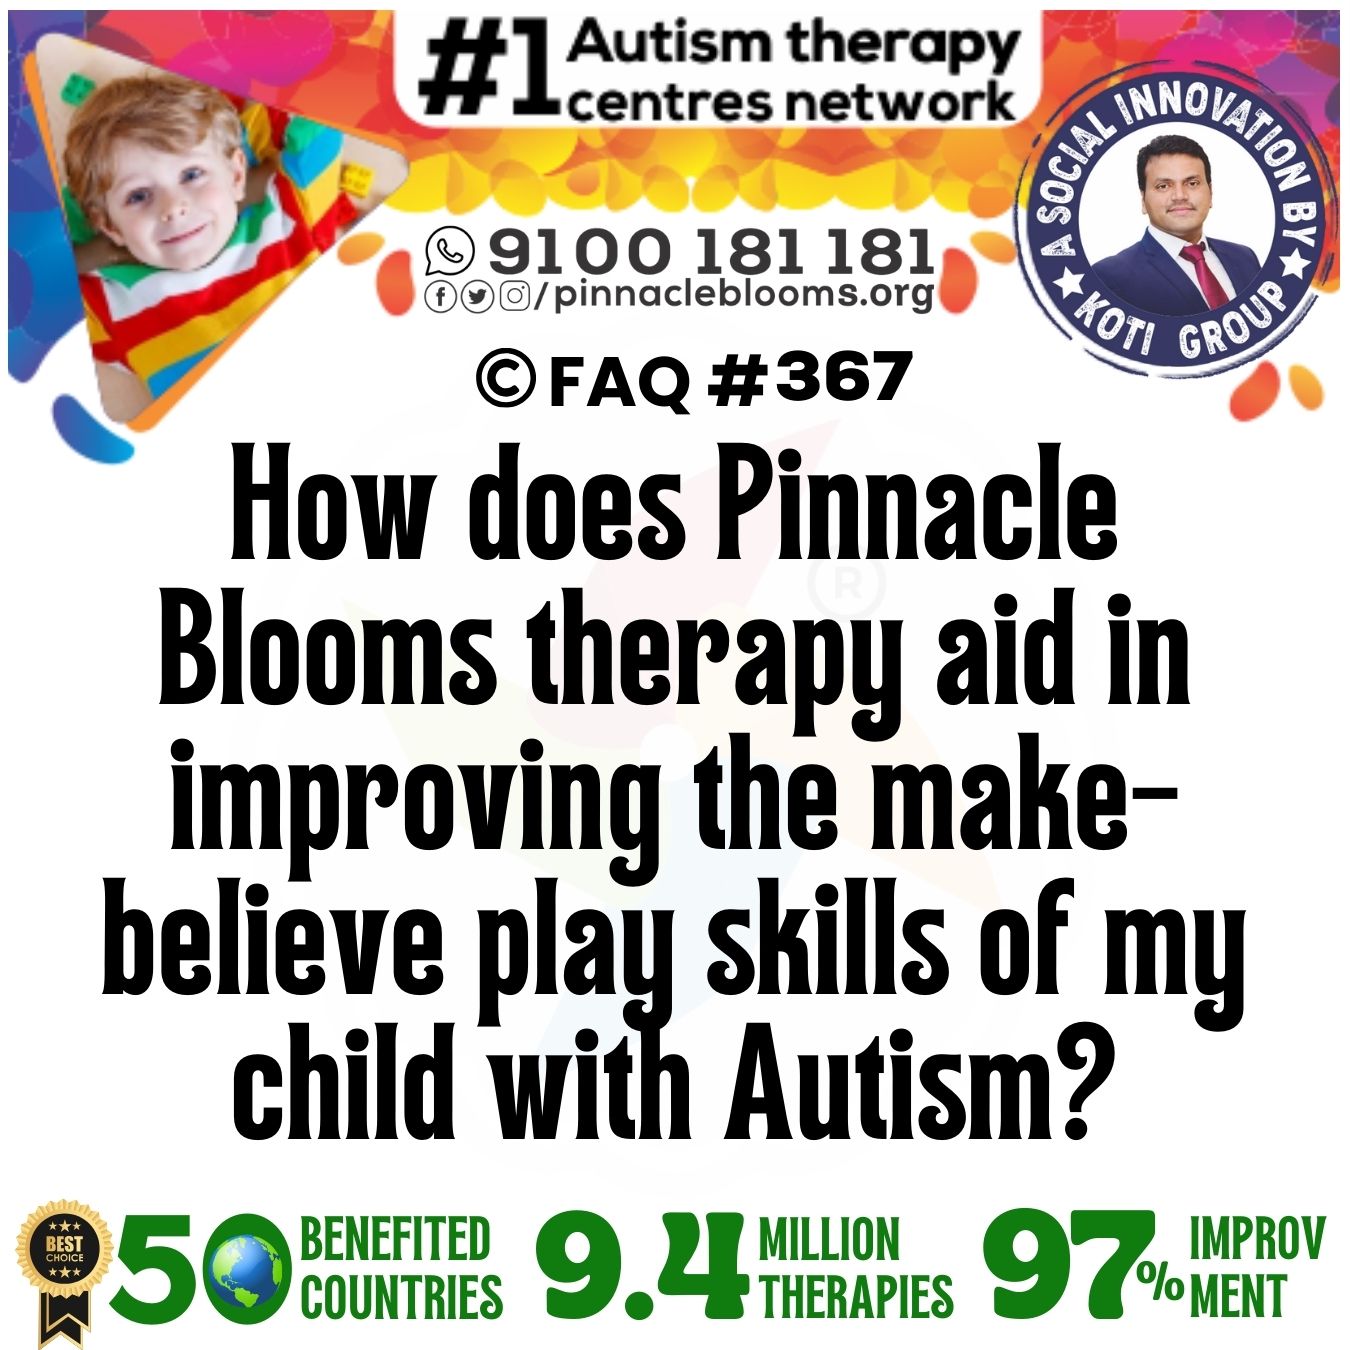 How does Pinnacle Blooms therapy aid in improving the make-believe play skills of my child with Autism?